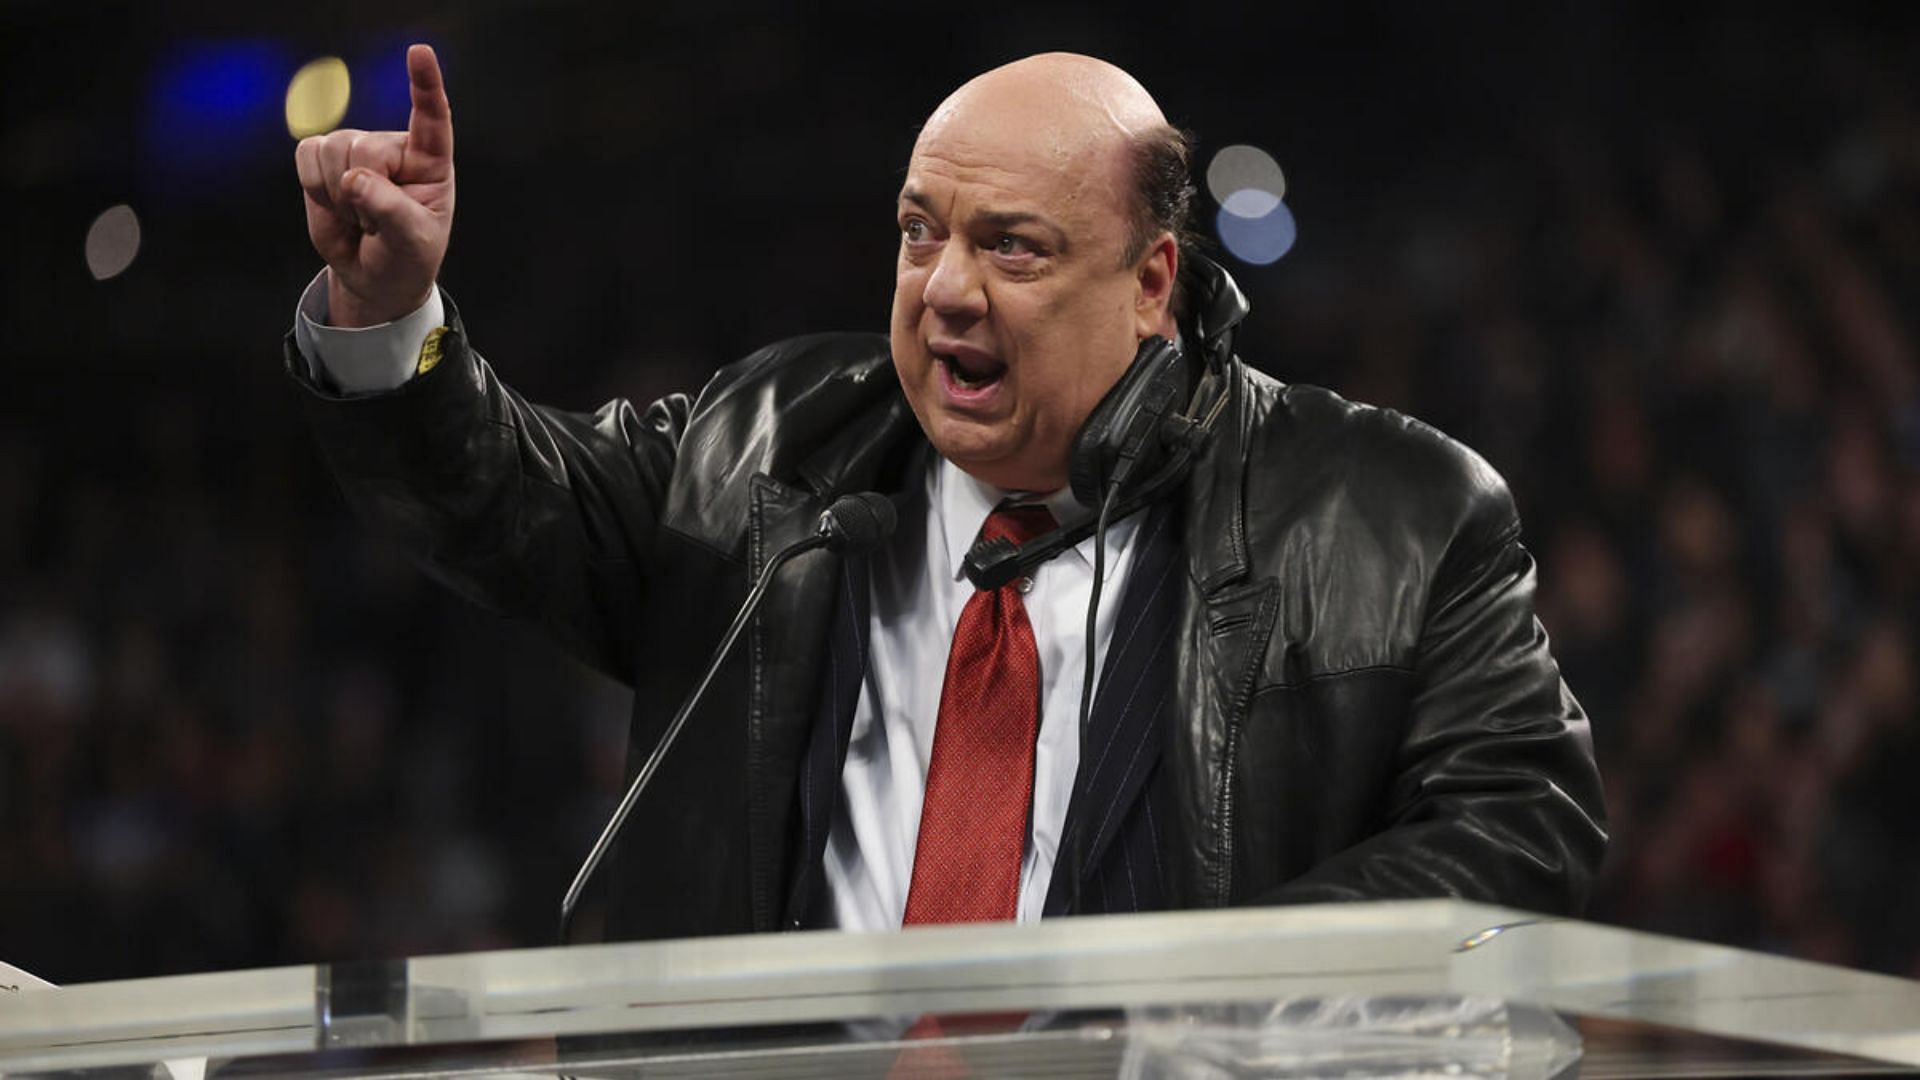 Paul Heyman was inducted to the WWE Hall of Fame this year